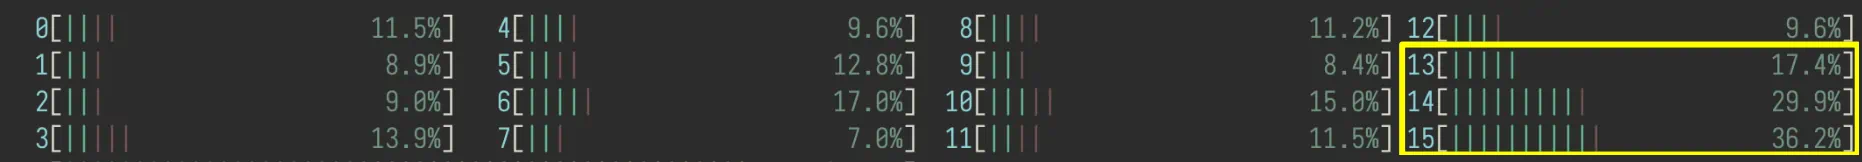 An image showing that the three cores are utilized below 40%